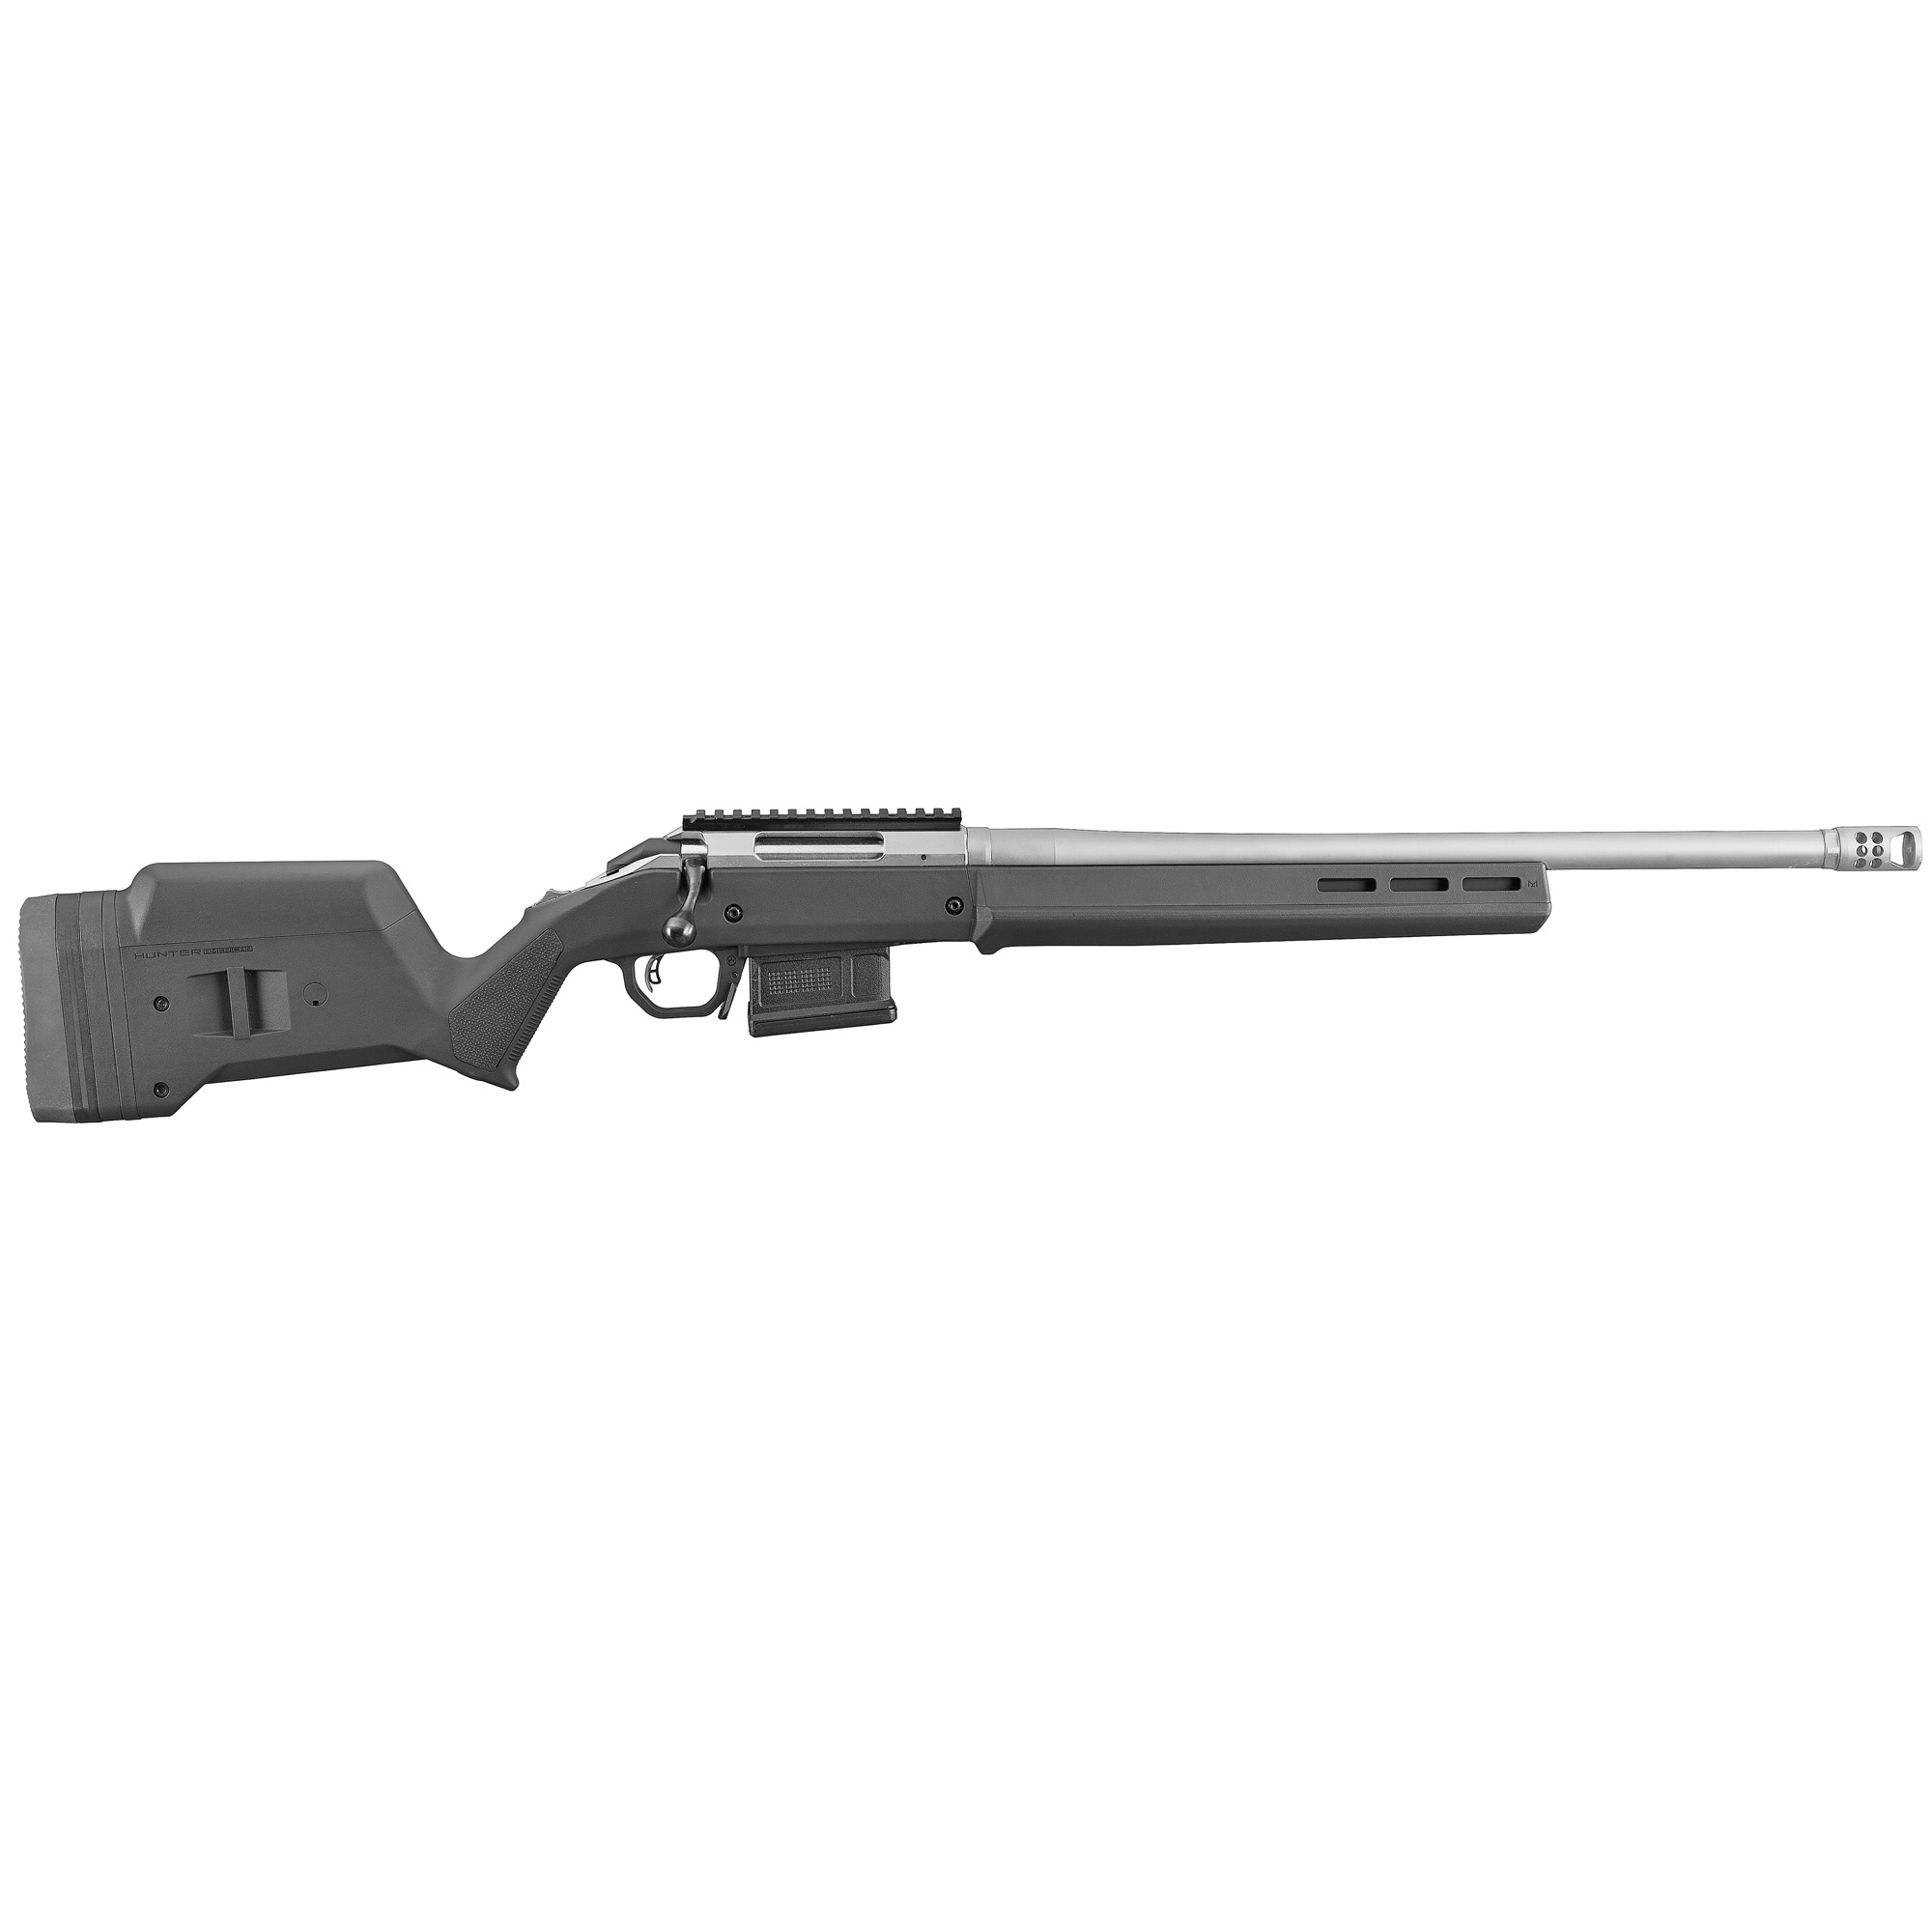 RUGER AMERICAN TAC 308WIN 16 5RD TL